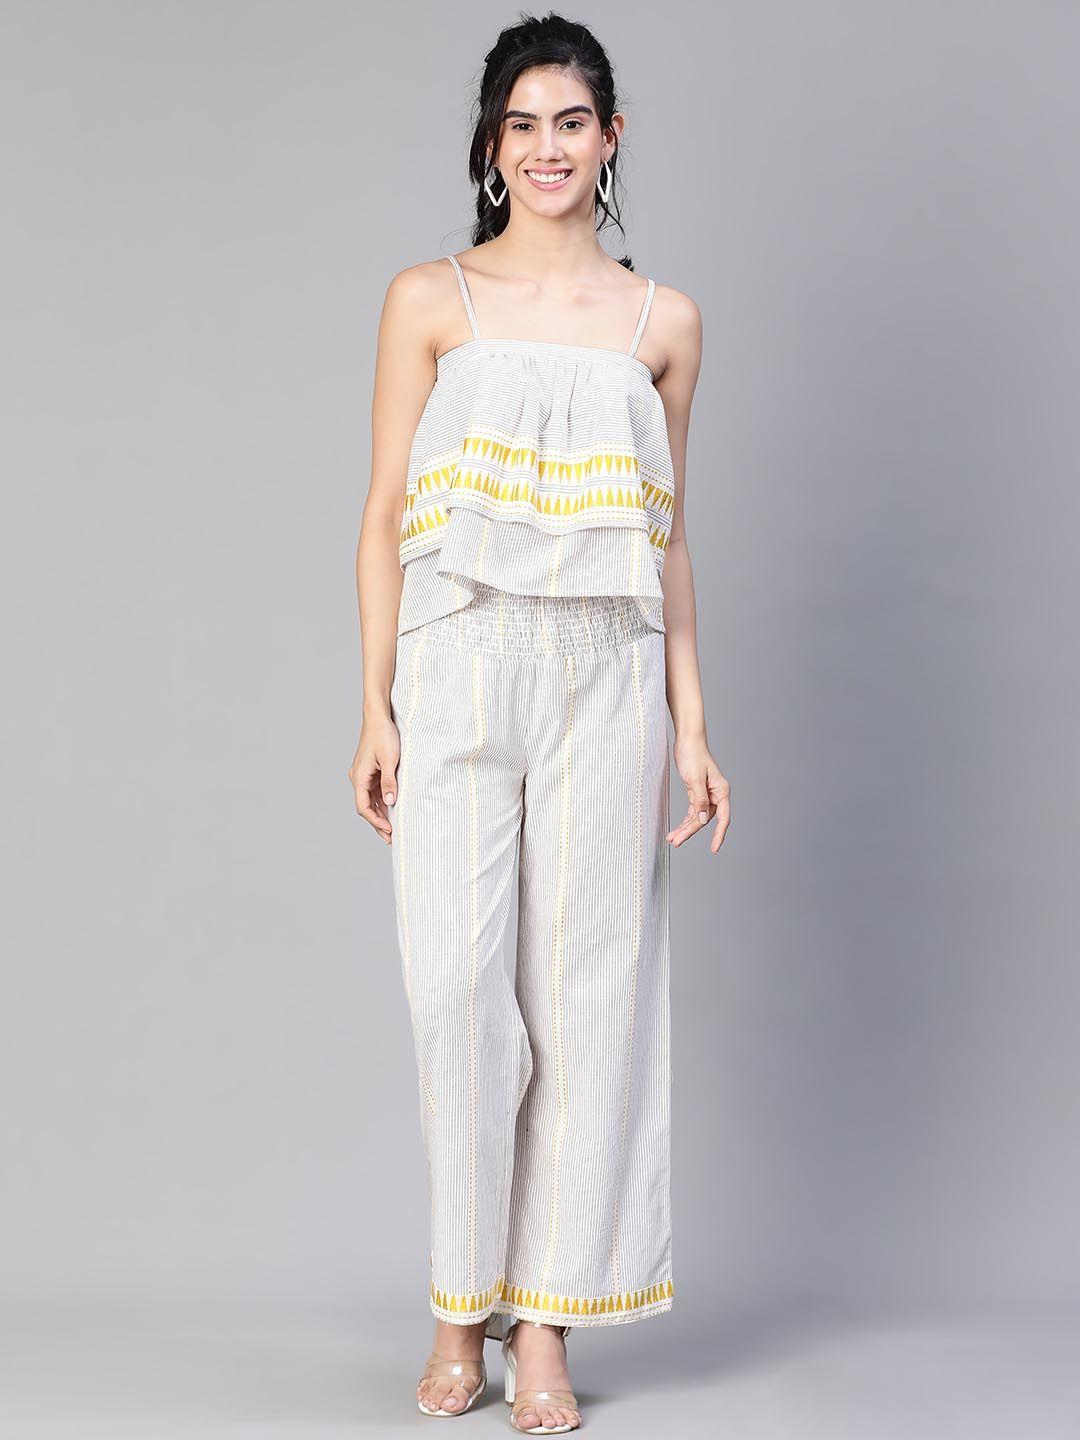 oxolloxo striped trousers with bustier crop top